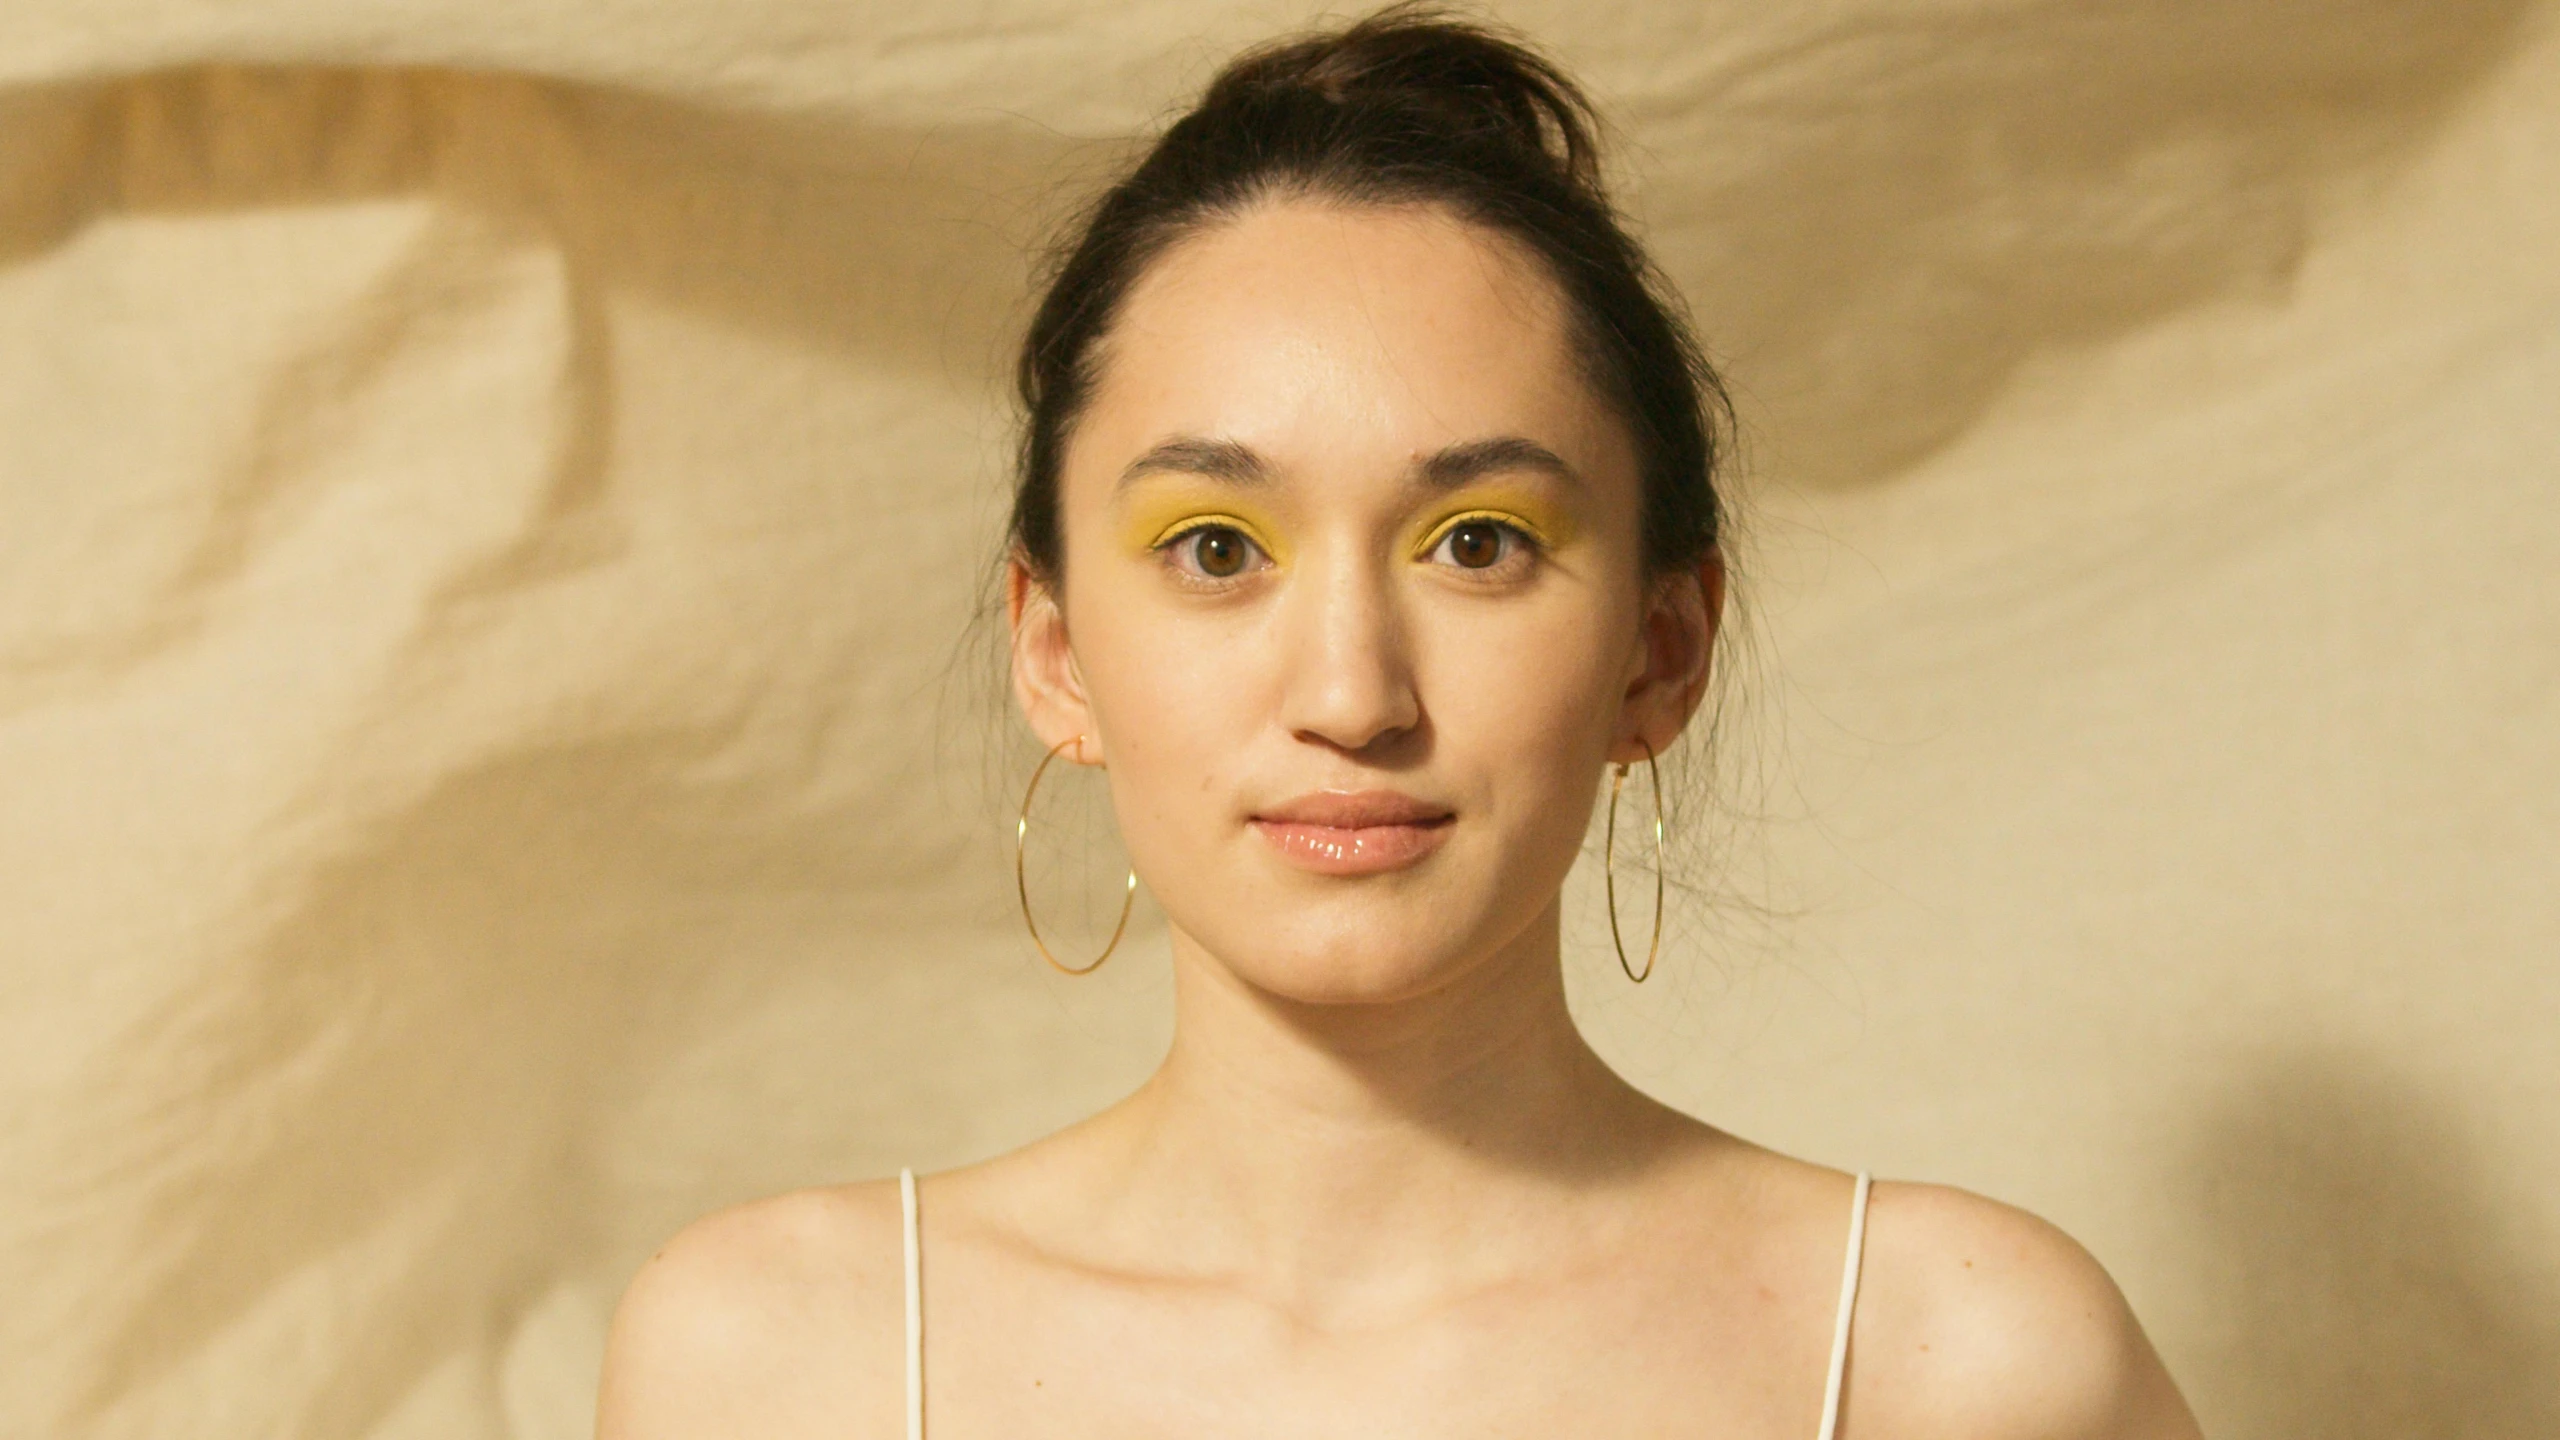 a woman with a yellow eye makeup and hoop earrings on